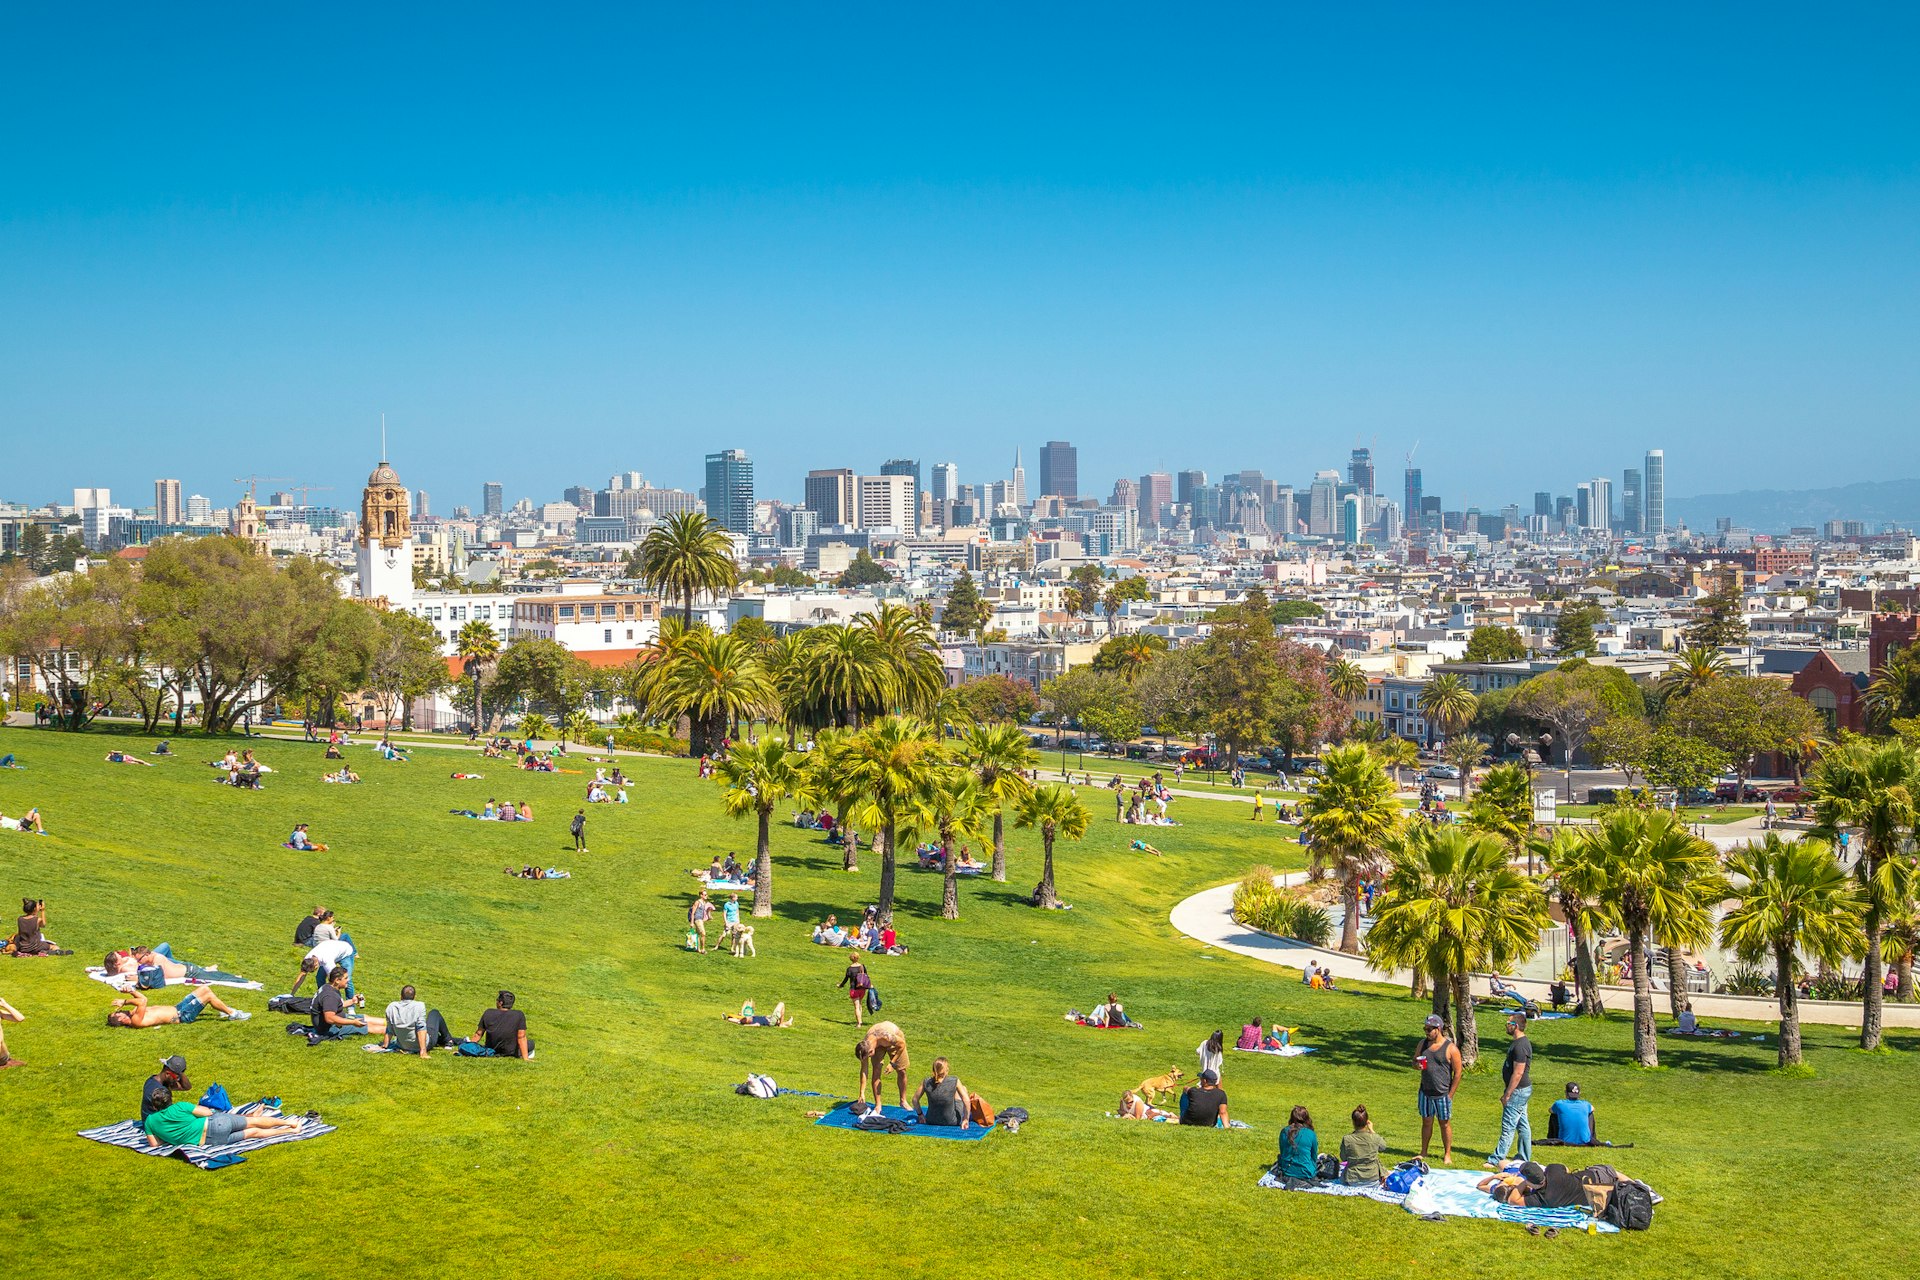 Groups of people and individuals sit on very green grass in hilly parkland overlooking a city landscape